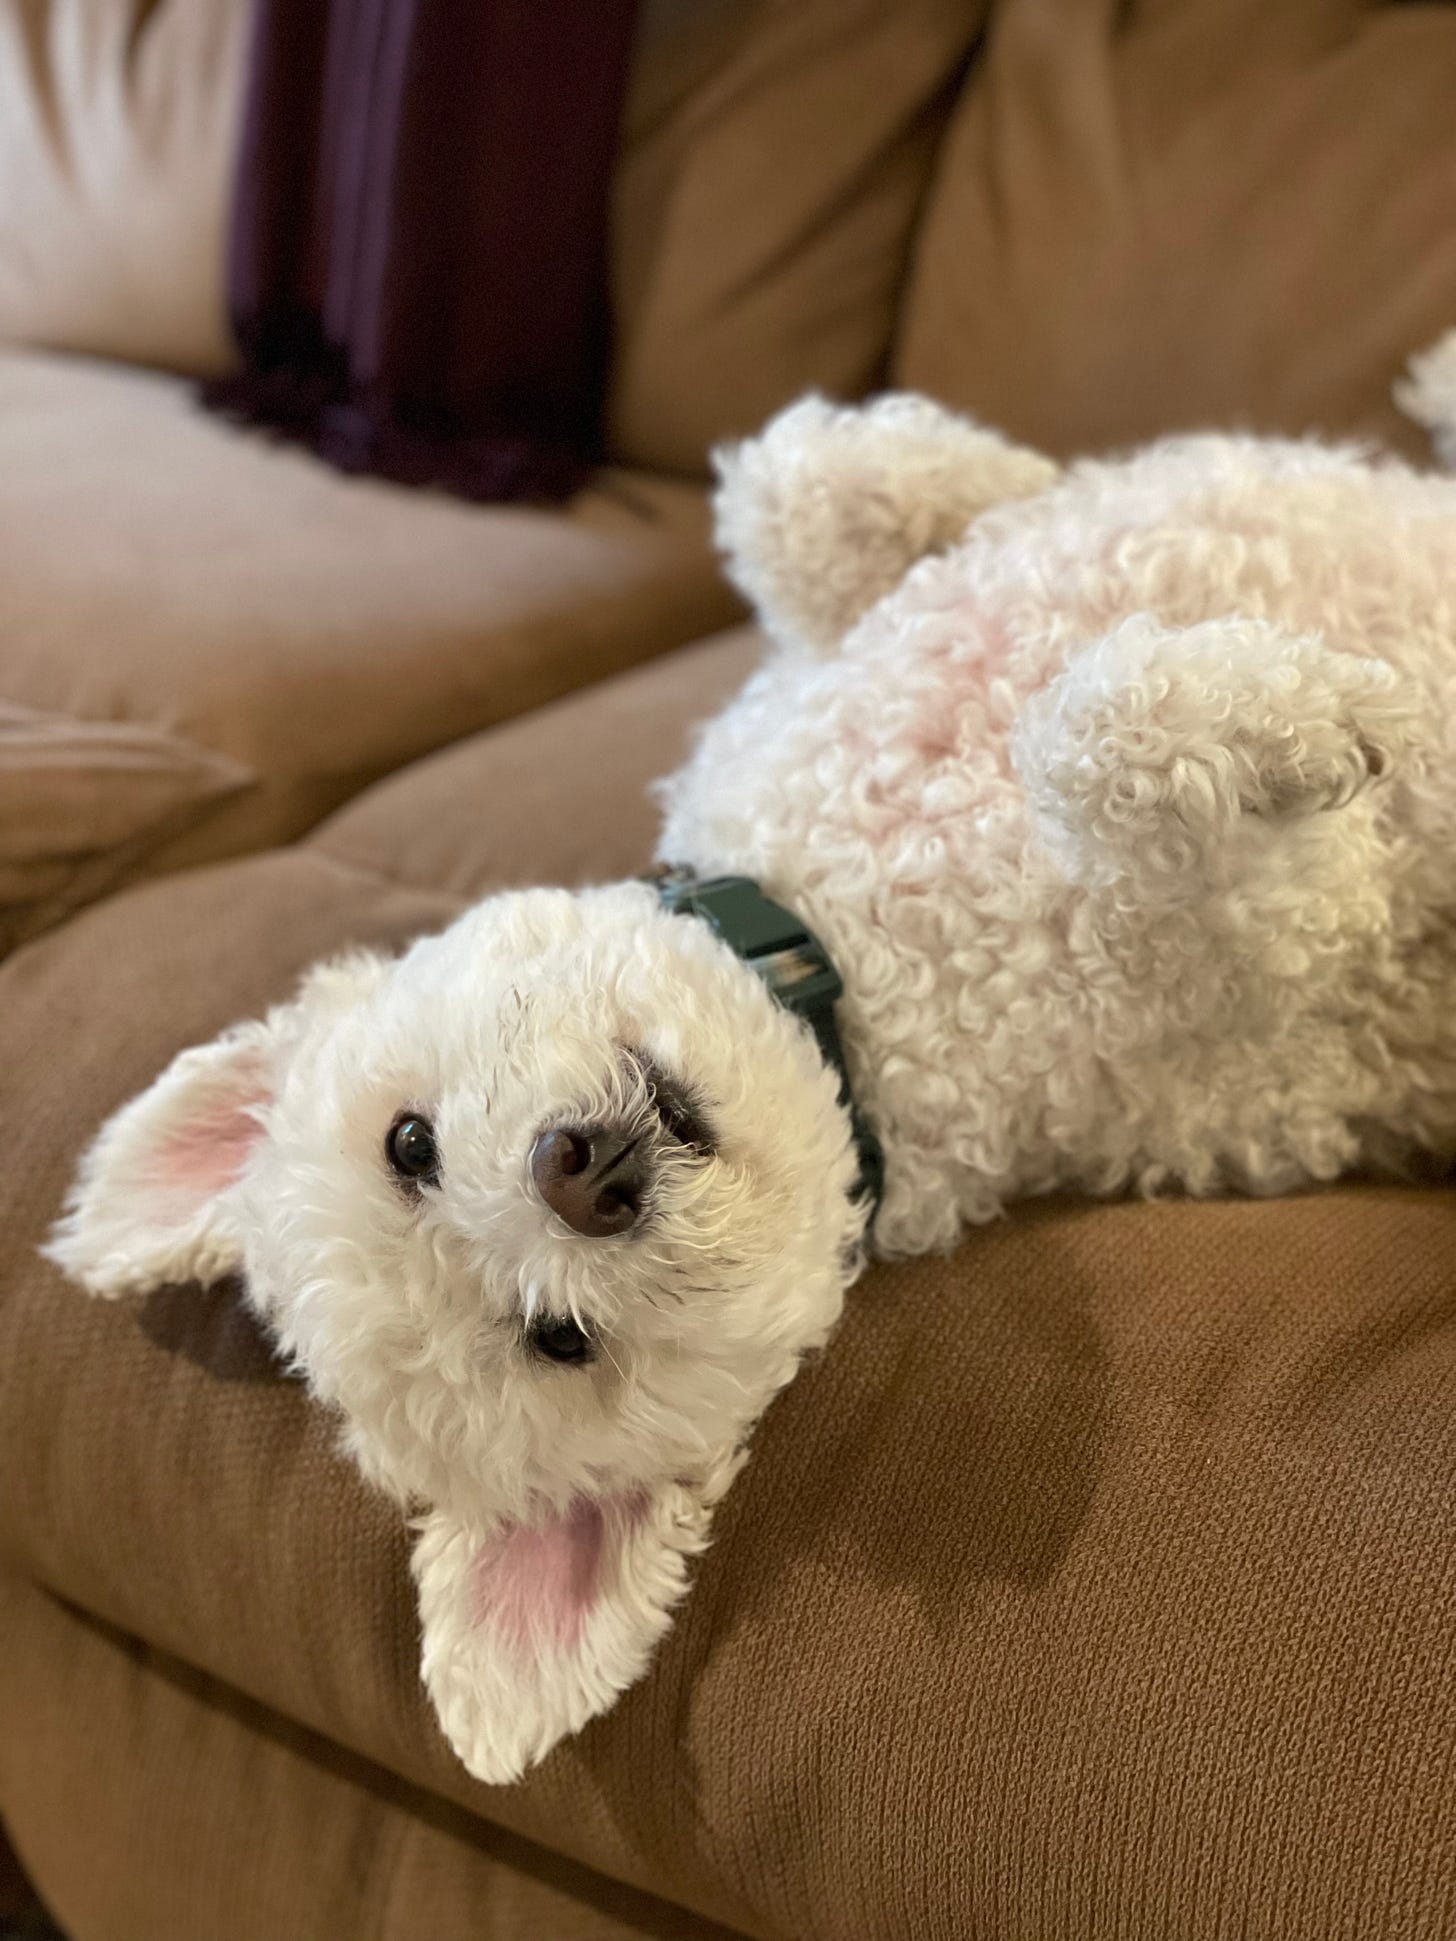 A fluffy white dog lies on his back atop a beige couch. He peers into the camera, upside-down, with his front paws out. He wears a green collar.